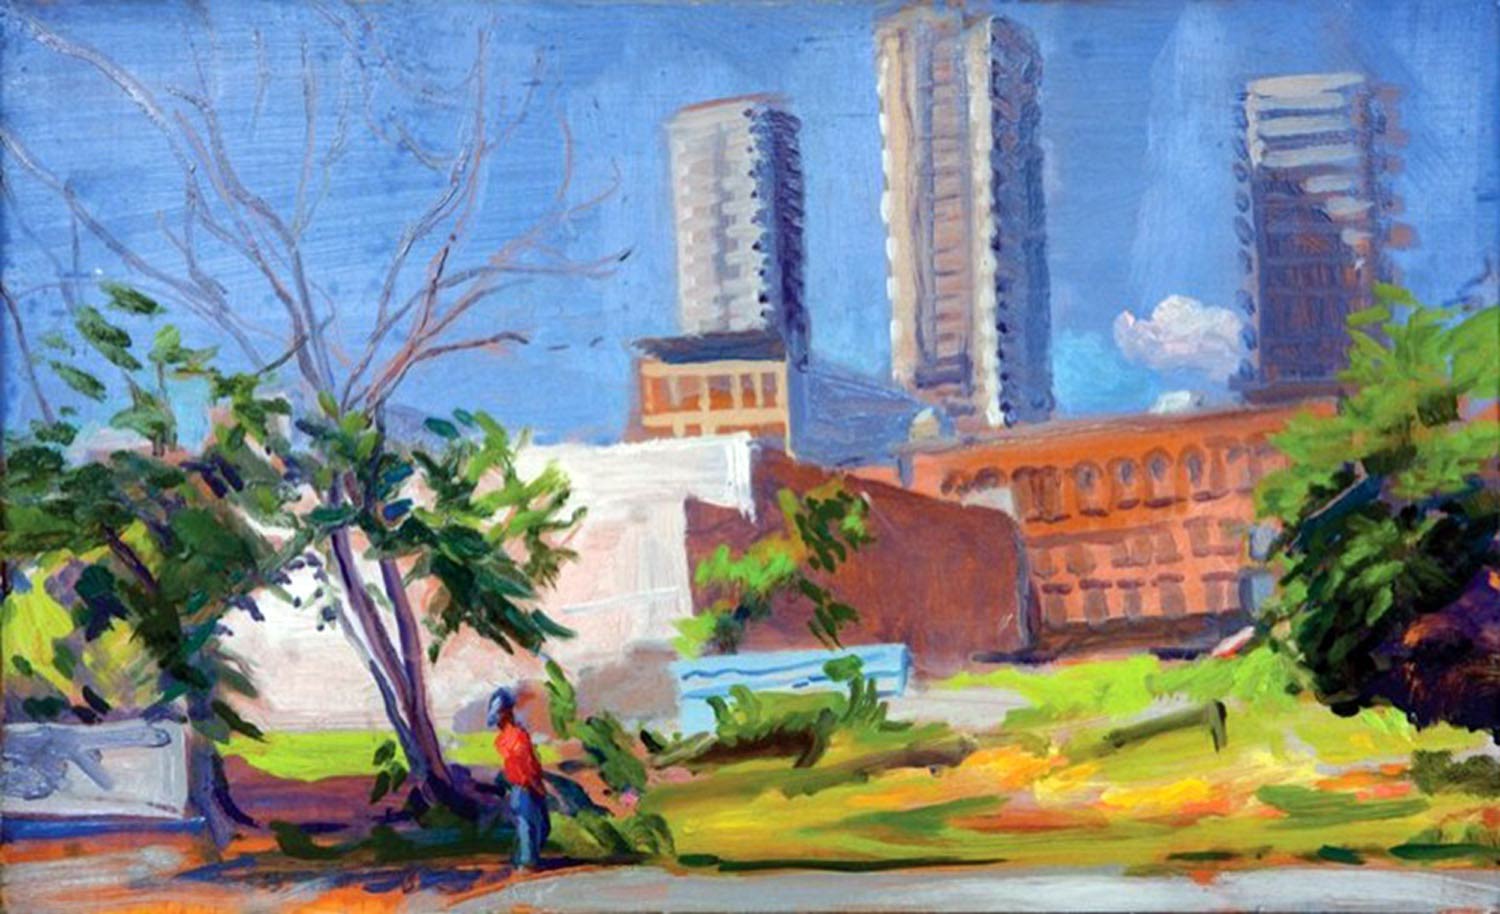 TainoTowers 12 x 16 in. oil on wood 2004